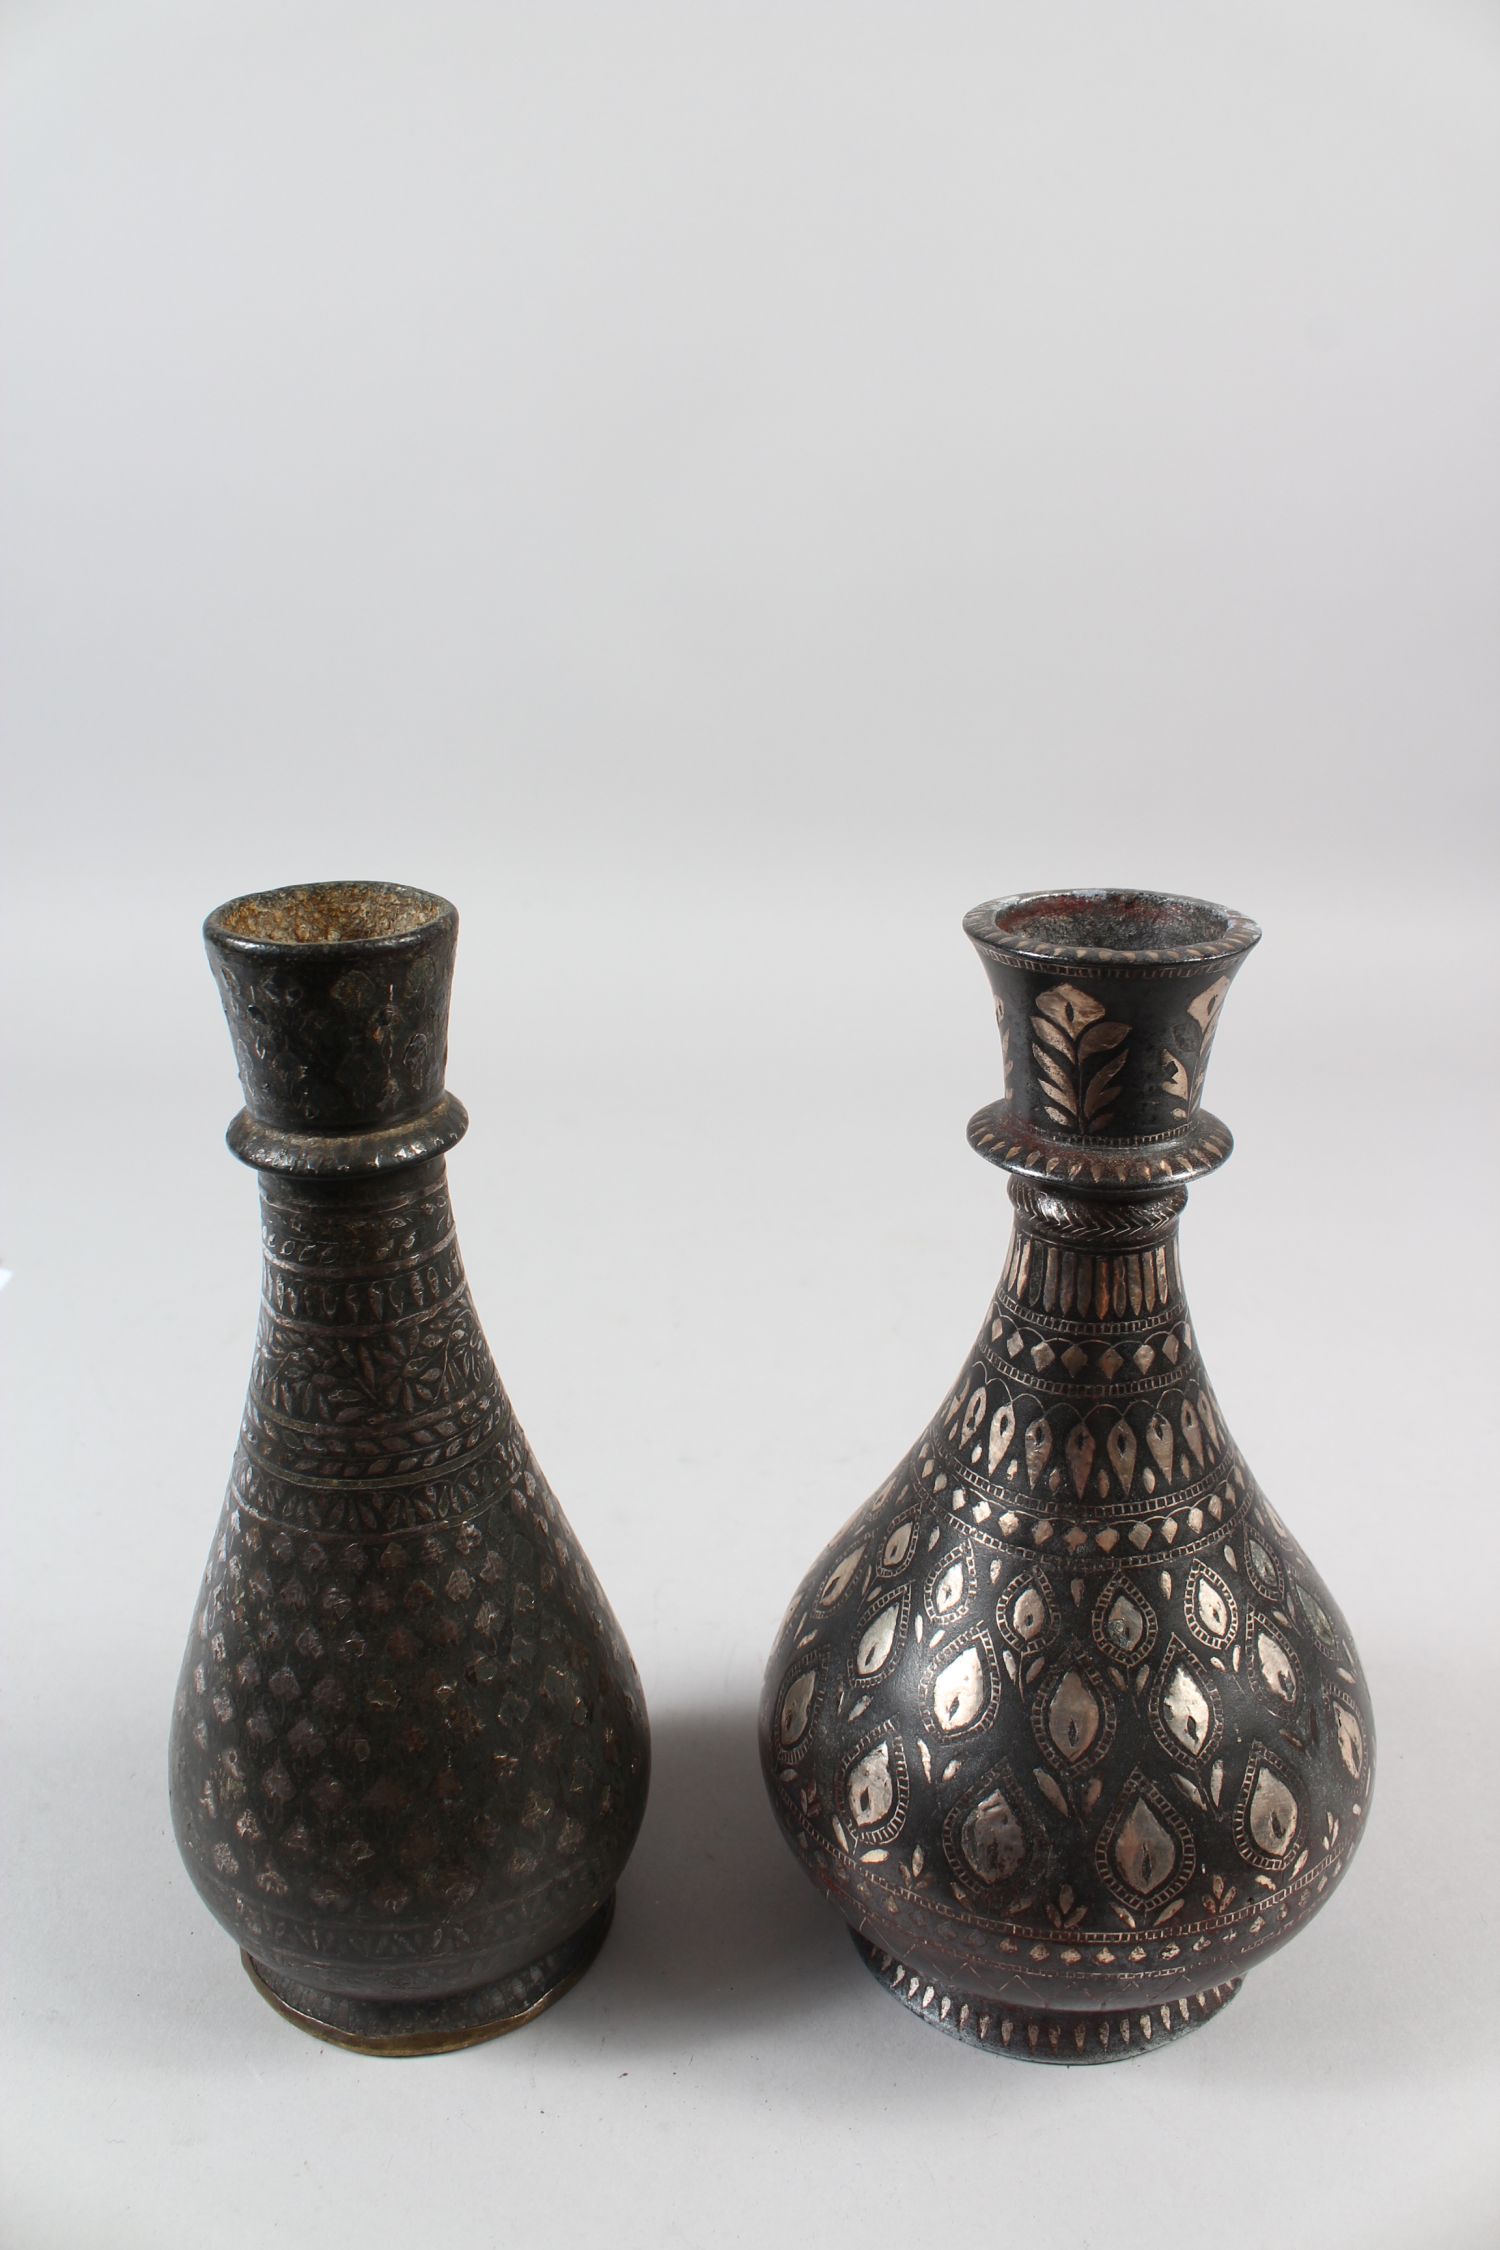 TWO EARLY 19TH CENTURY INDIAN BIDRI SILVER INLAID HUQQA BOTTLES, 20cm high. - Image 2 of 9